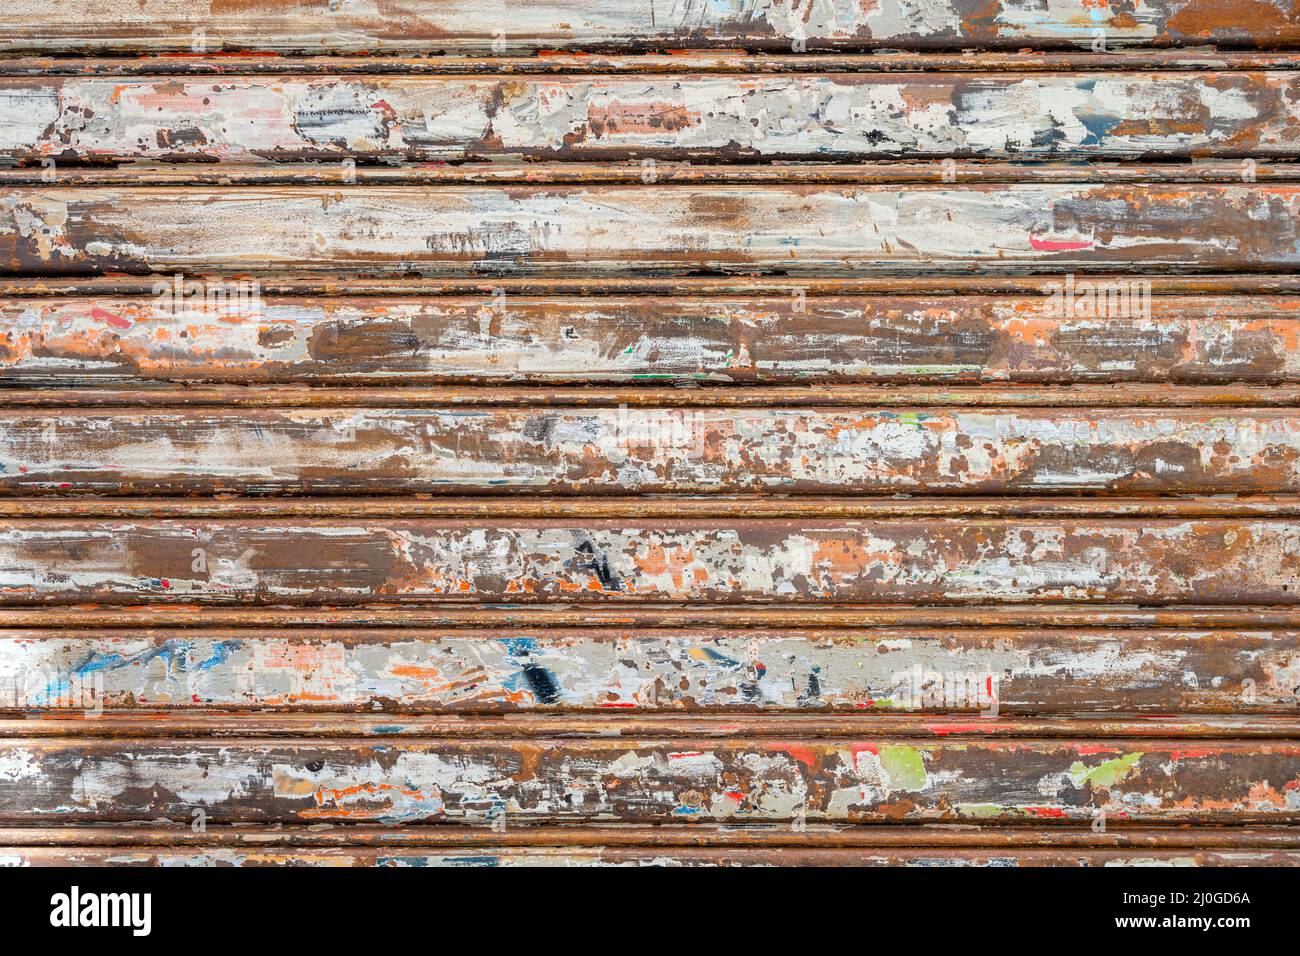 Old metallic store blinds with signs of usage Stock Photo